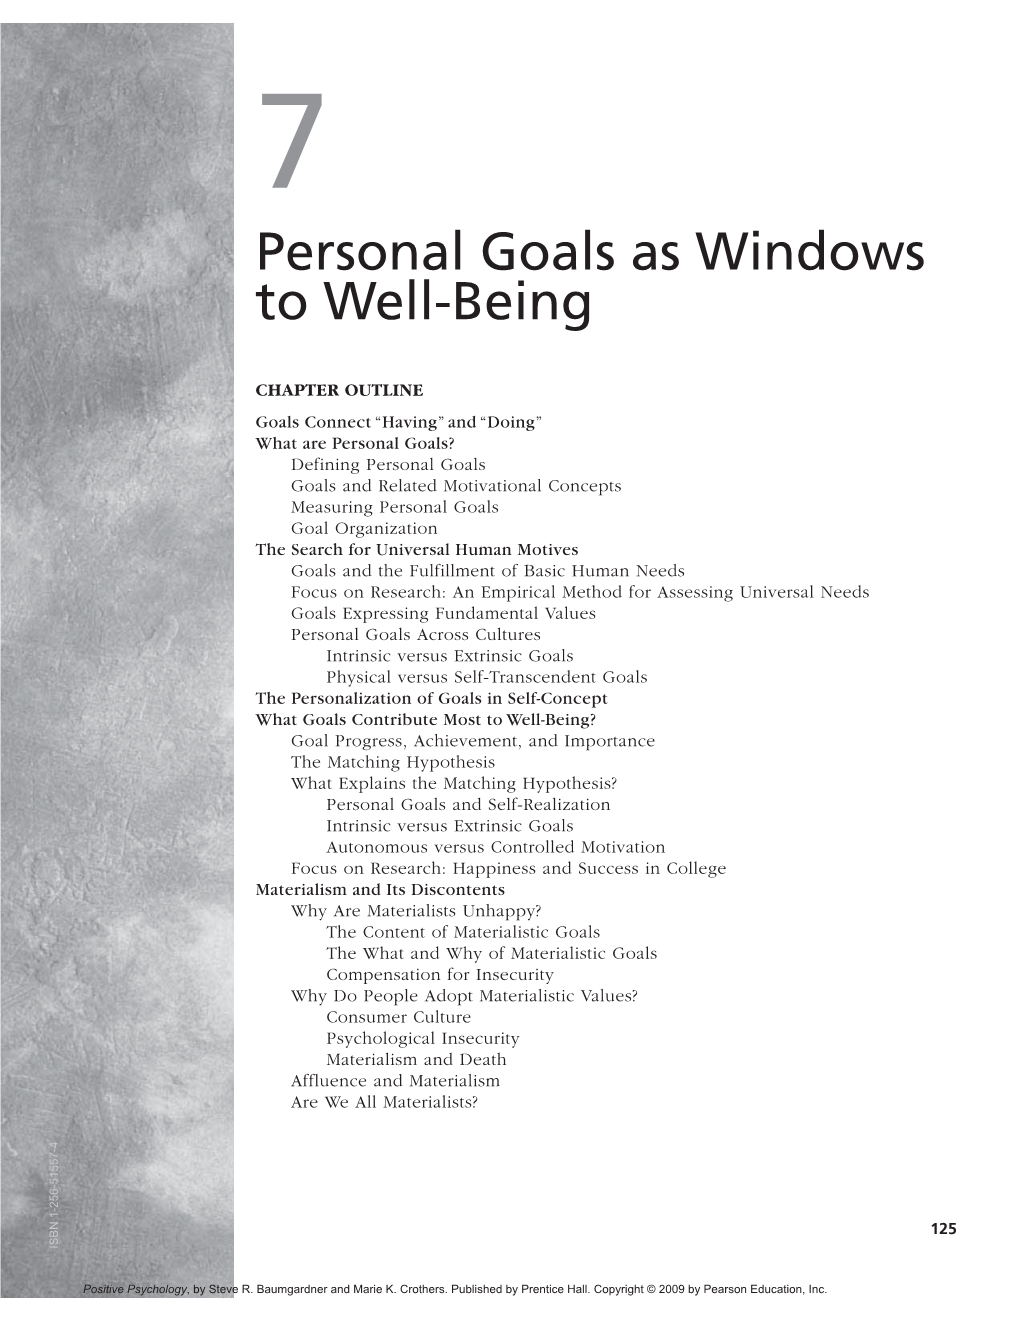 Personal Goals As Windows to Well-Being